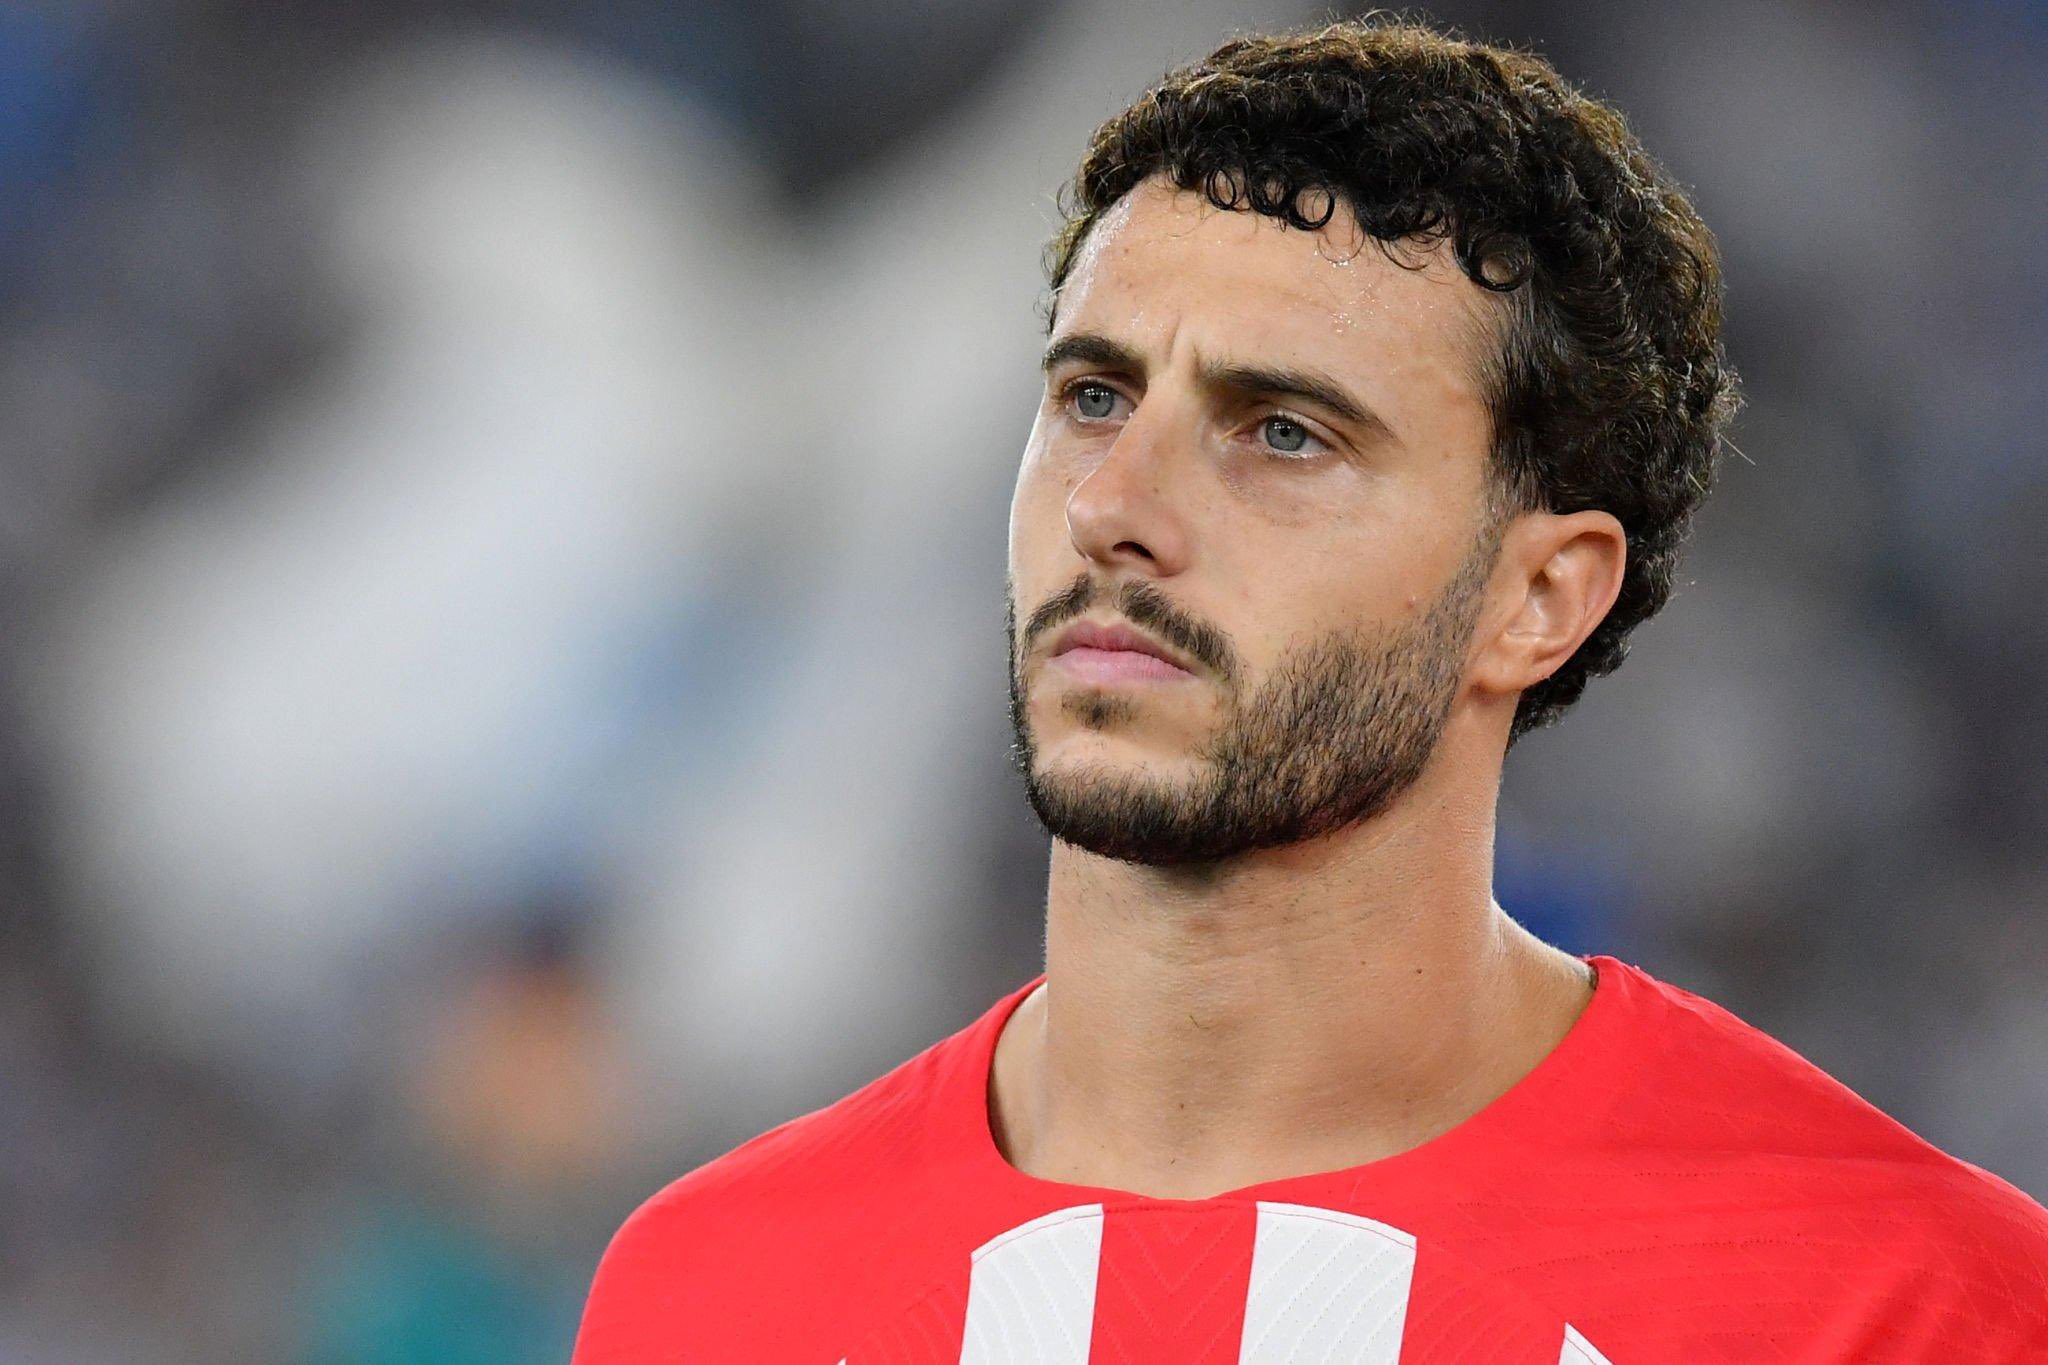 Mario Hermoso update: Atletico Madrid situation unchanged after Enrique Cerezo comments